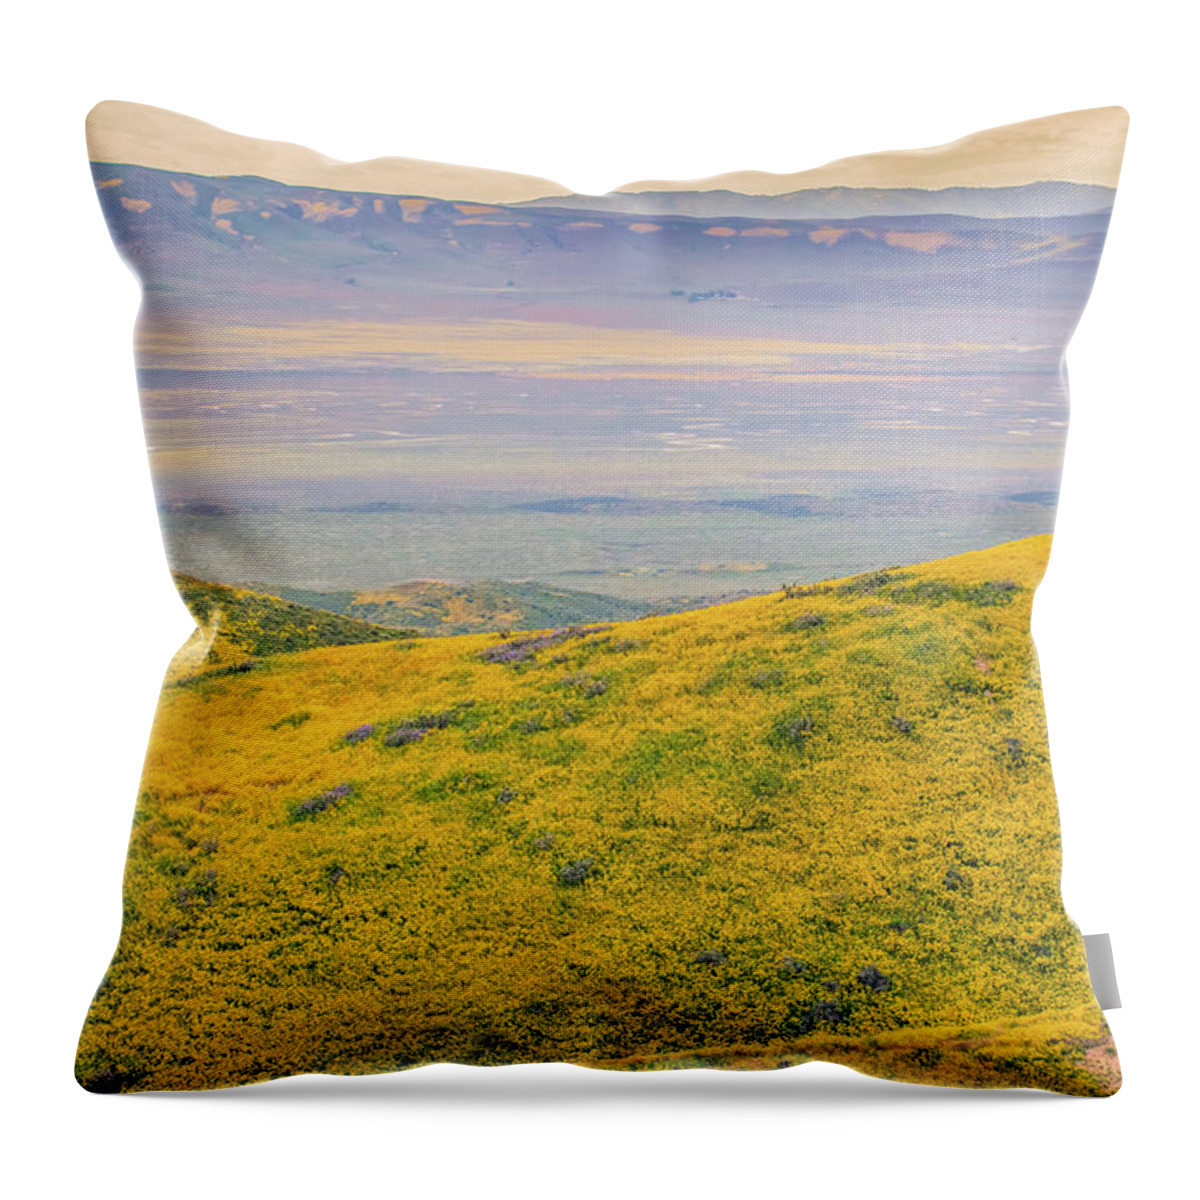 California Throw Pillow featuring the photograph From the Temblor Range to the Caliente Range by Marc Crumpler